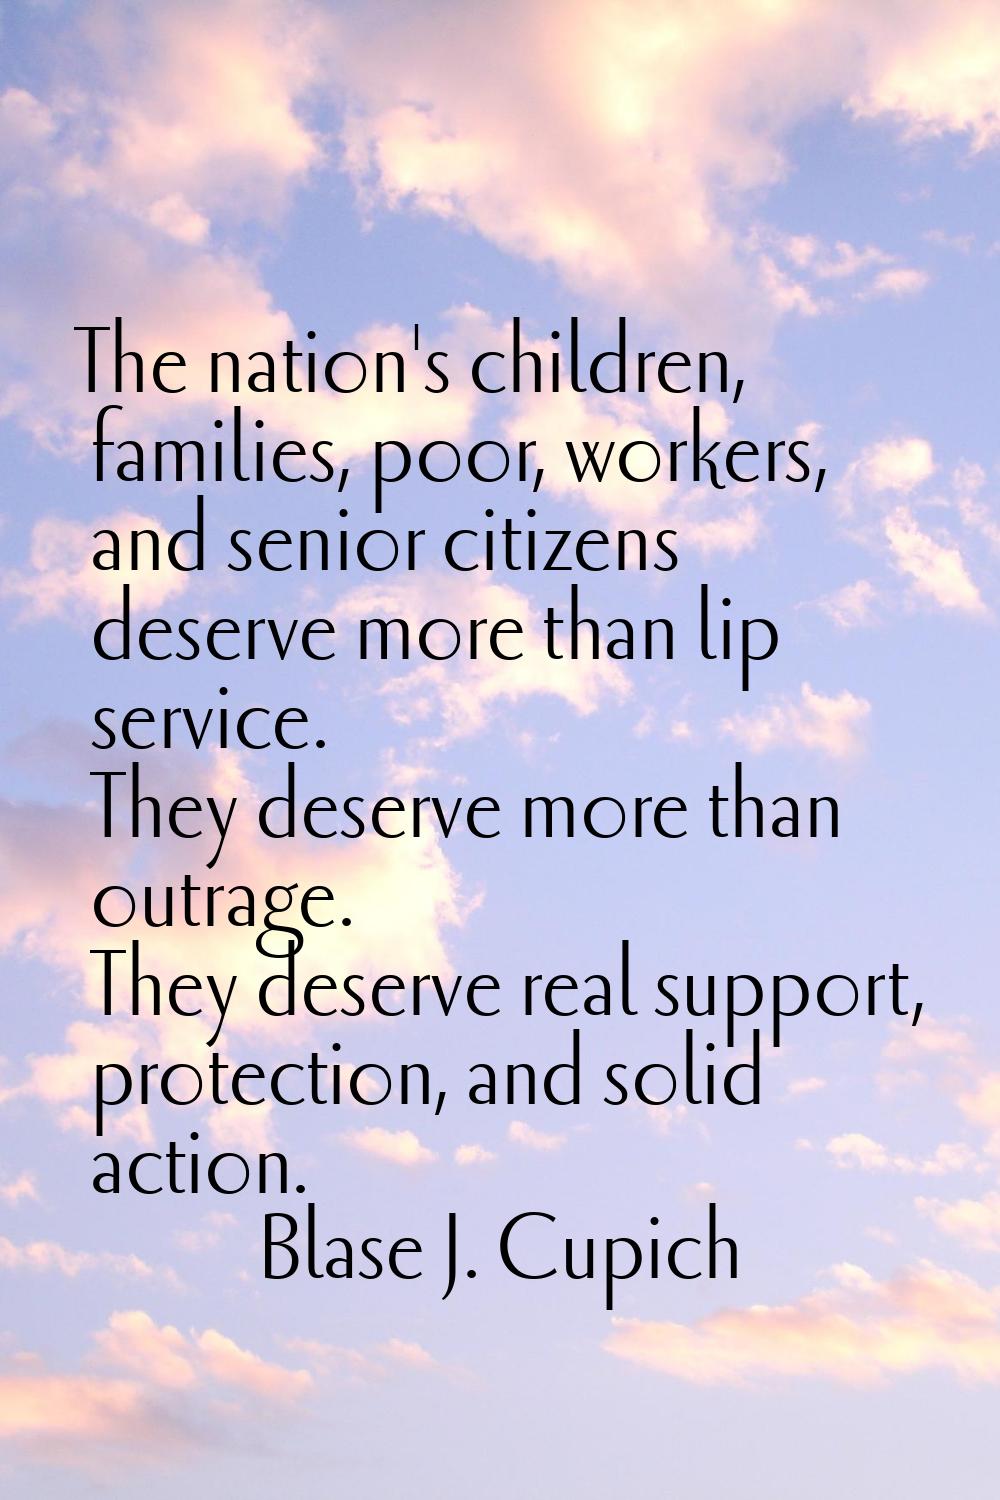 The nation's children, families, poor, workers, and senior citizens deserve more than lip service. 